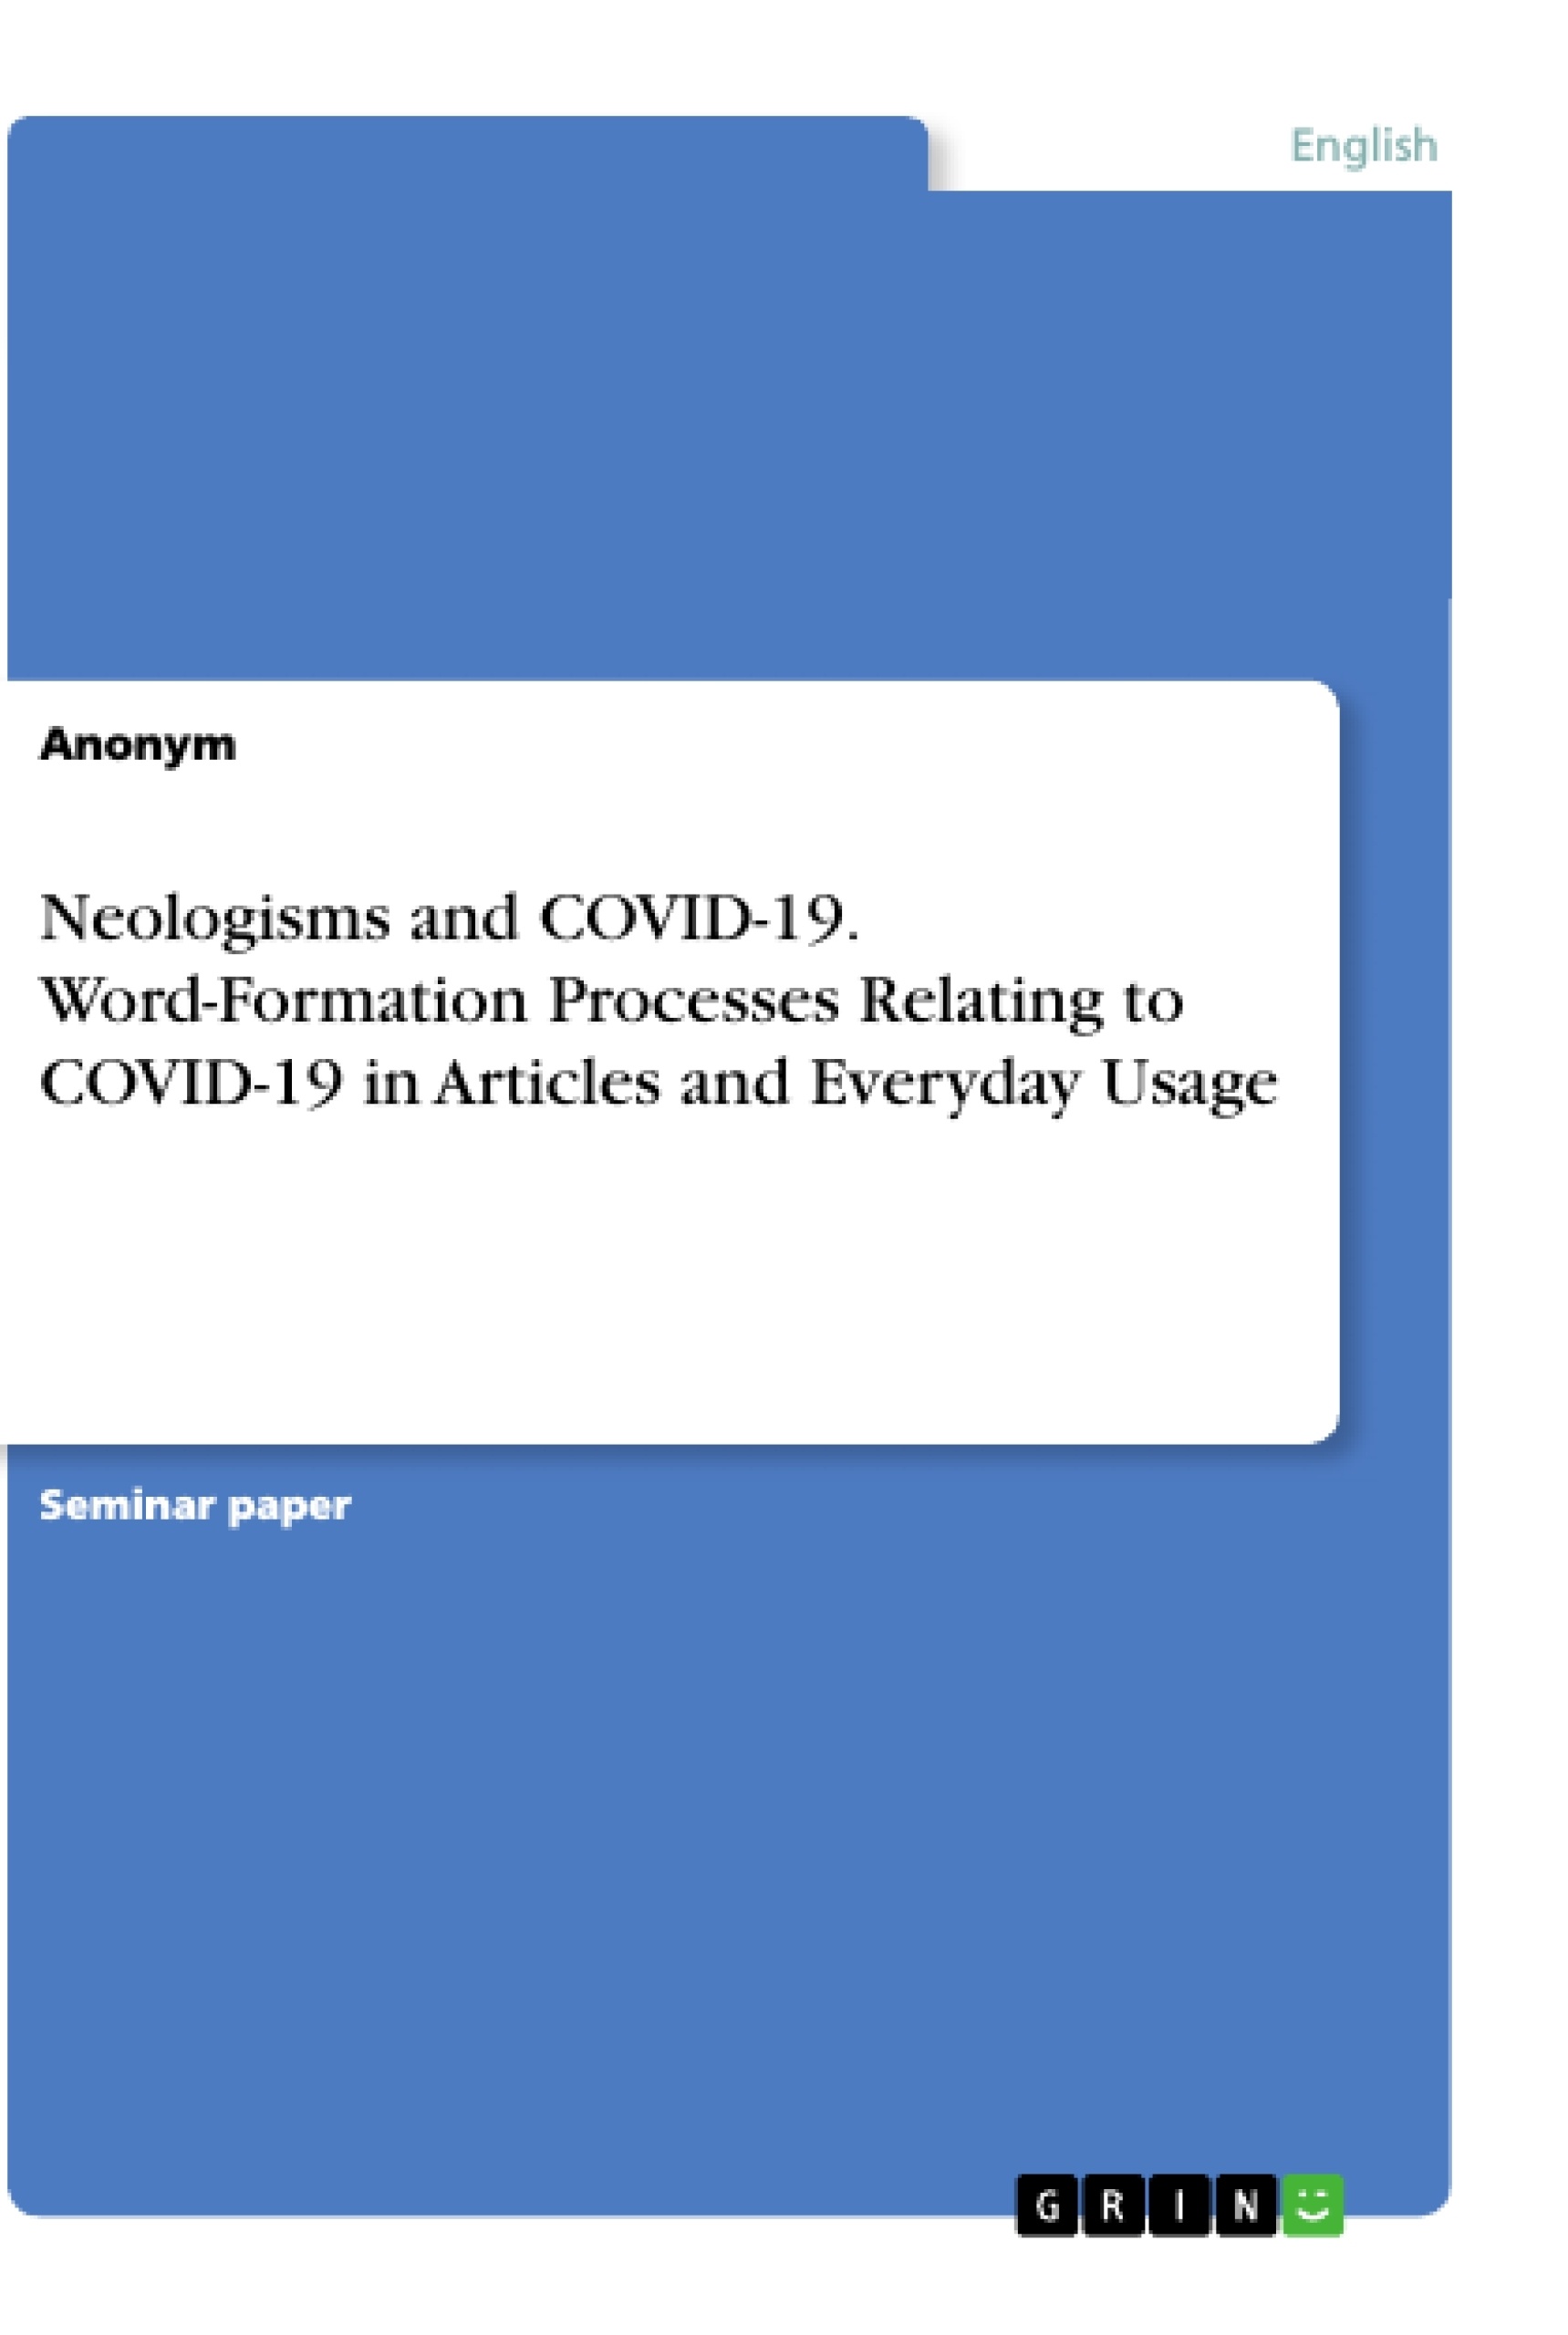 Title: Neologisms and COVID-19. Word-Formation Processes Relating to COVID-19 in Articles and Everyday Usage